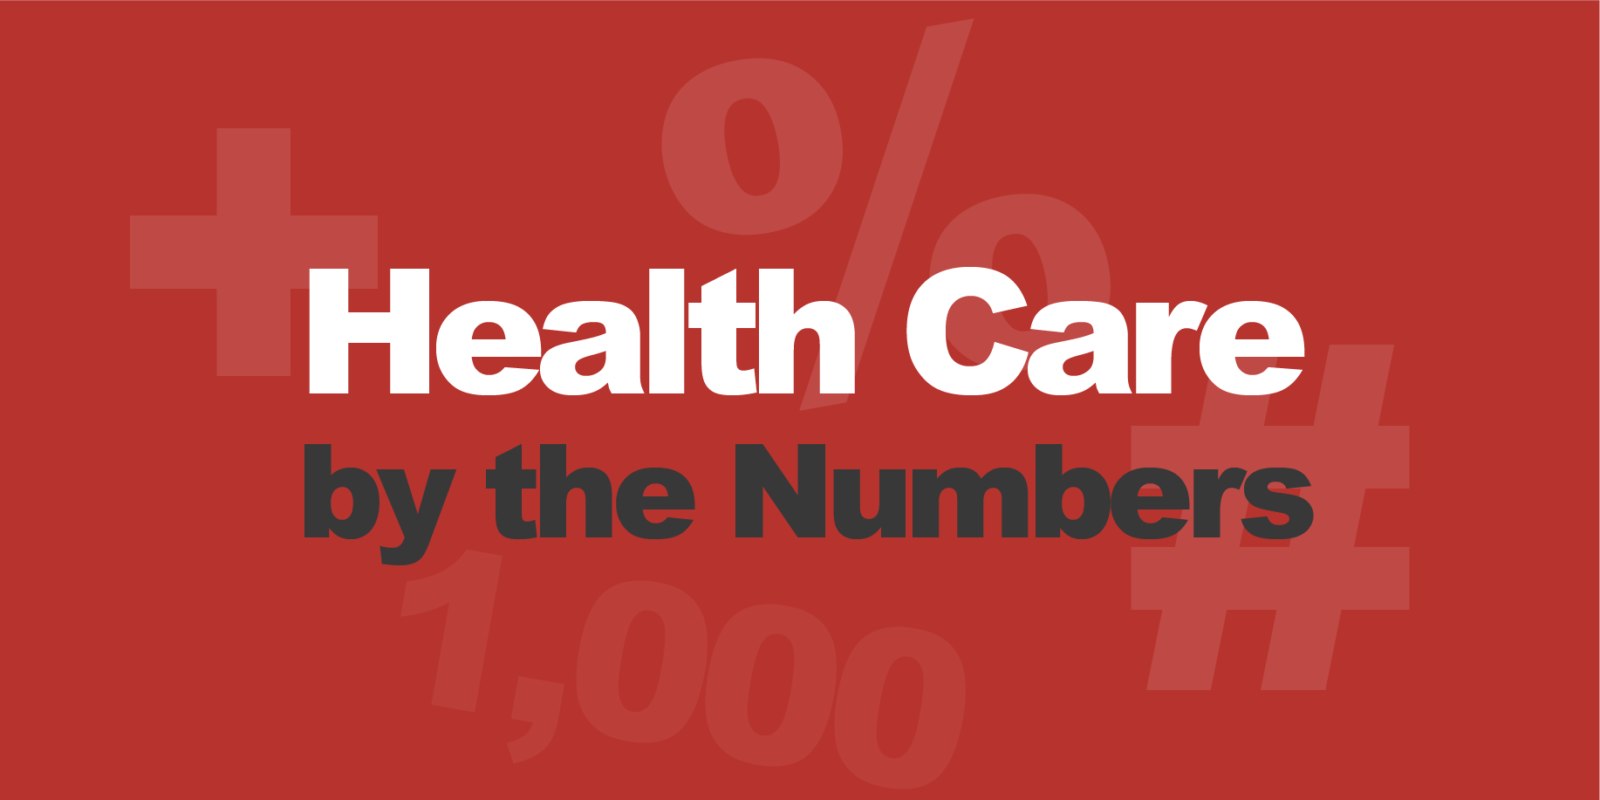 Health Care by the Numbers